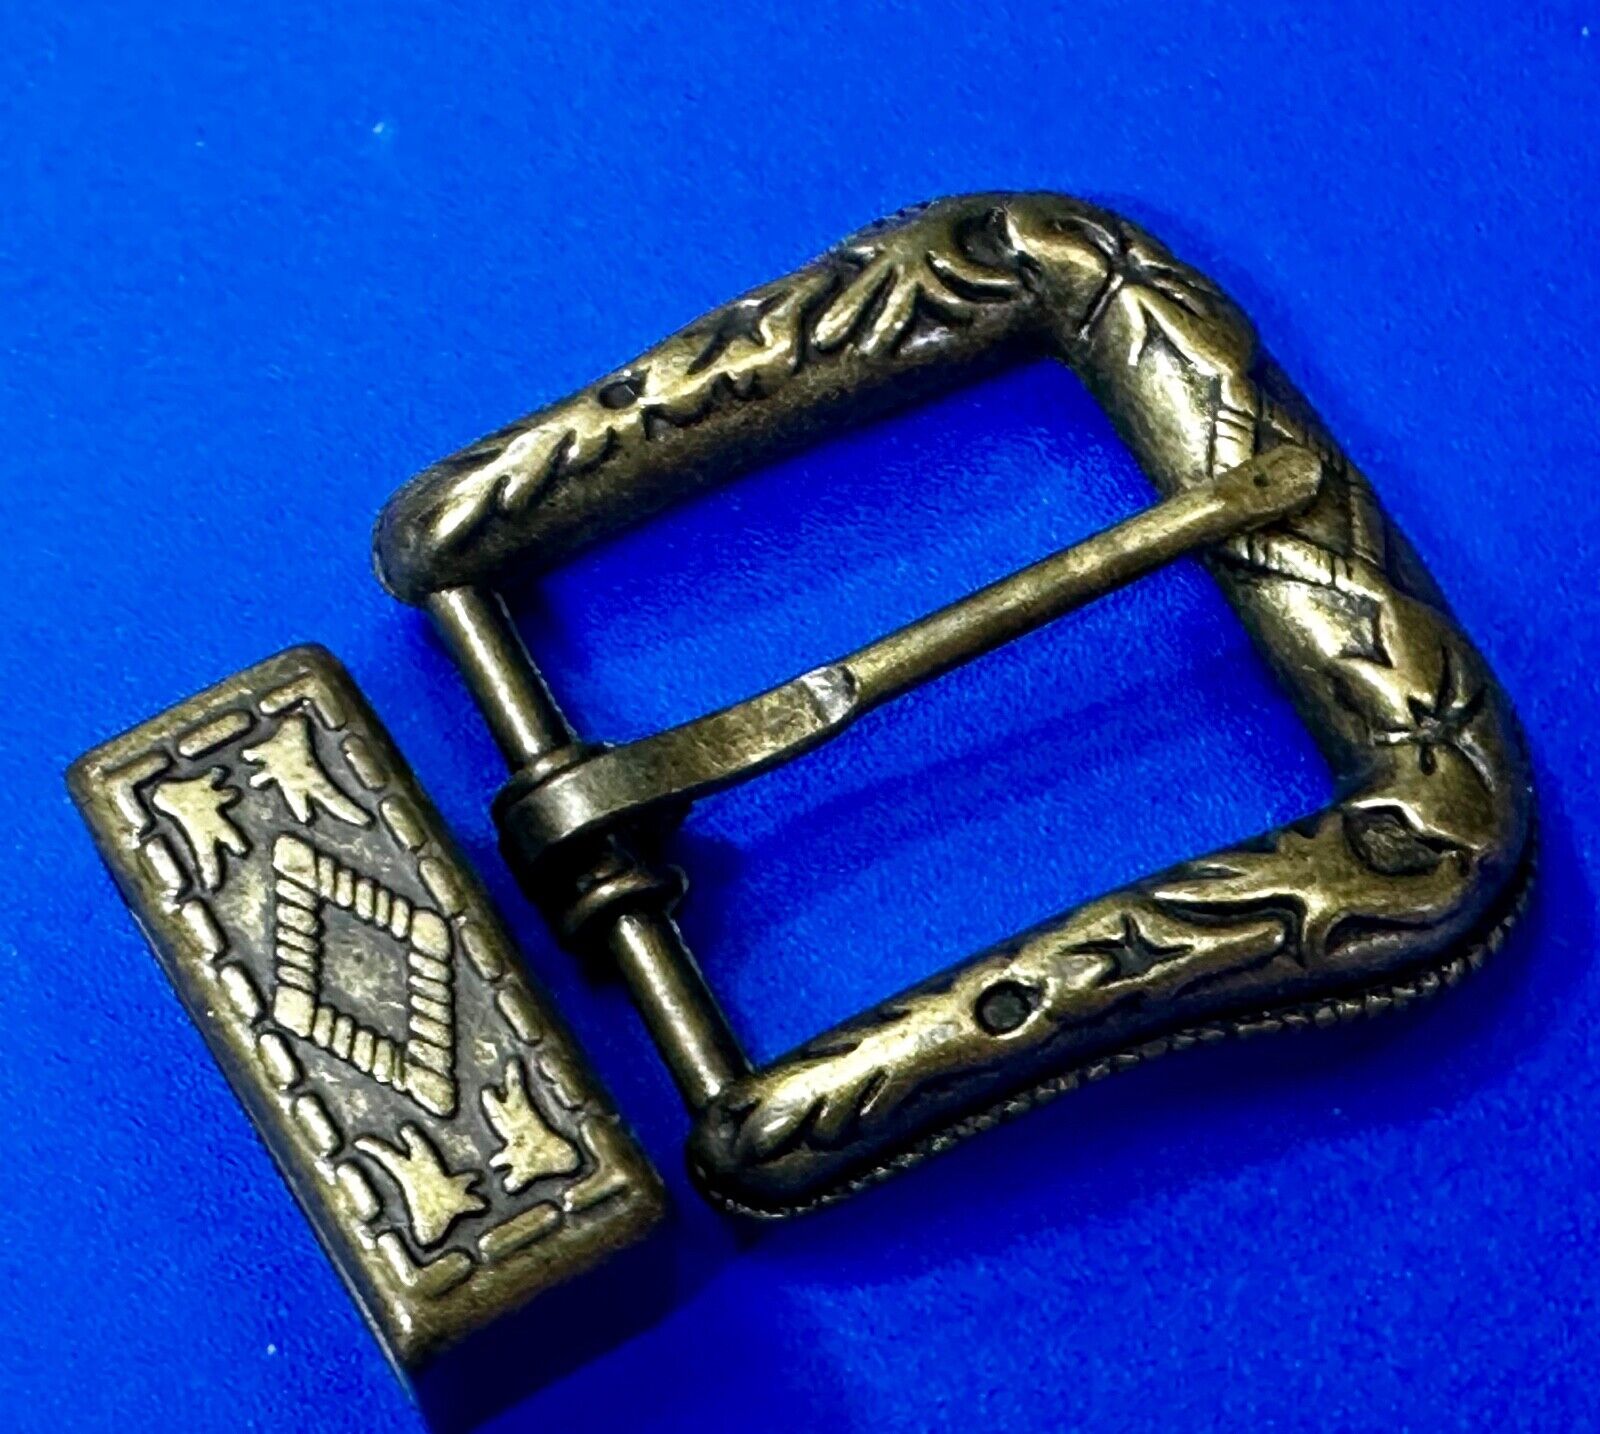 Ranger Style Swirl Design Replacement Vintage Western Belt Buckle and Keeper